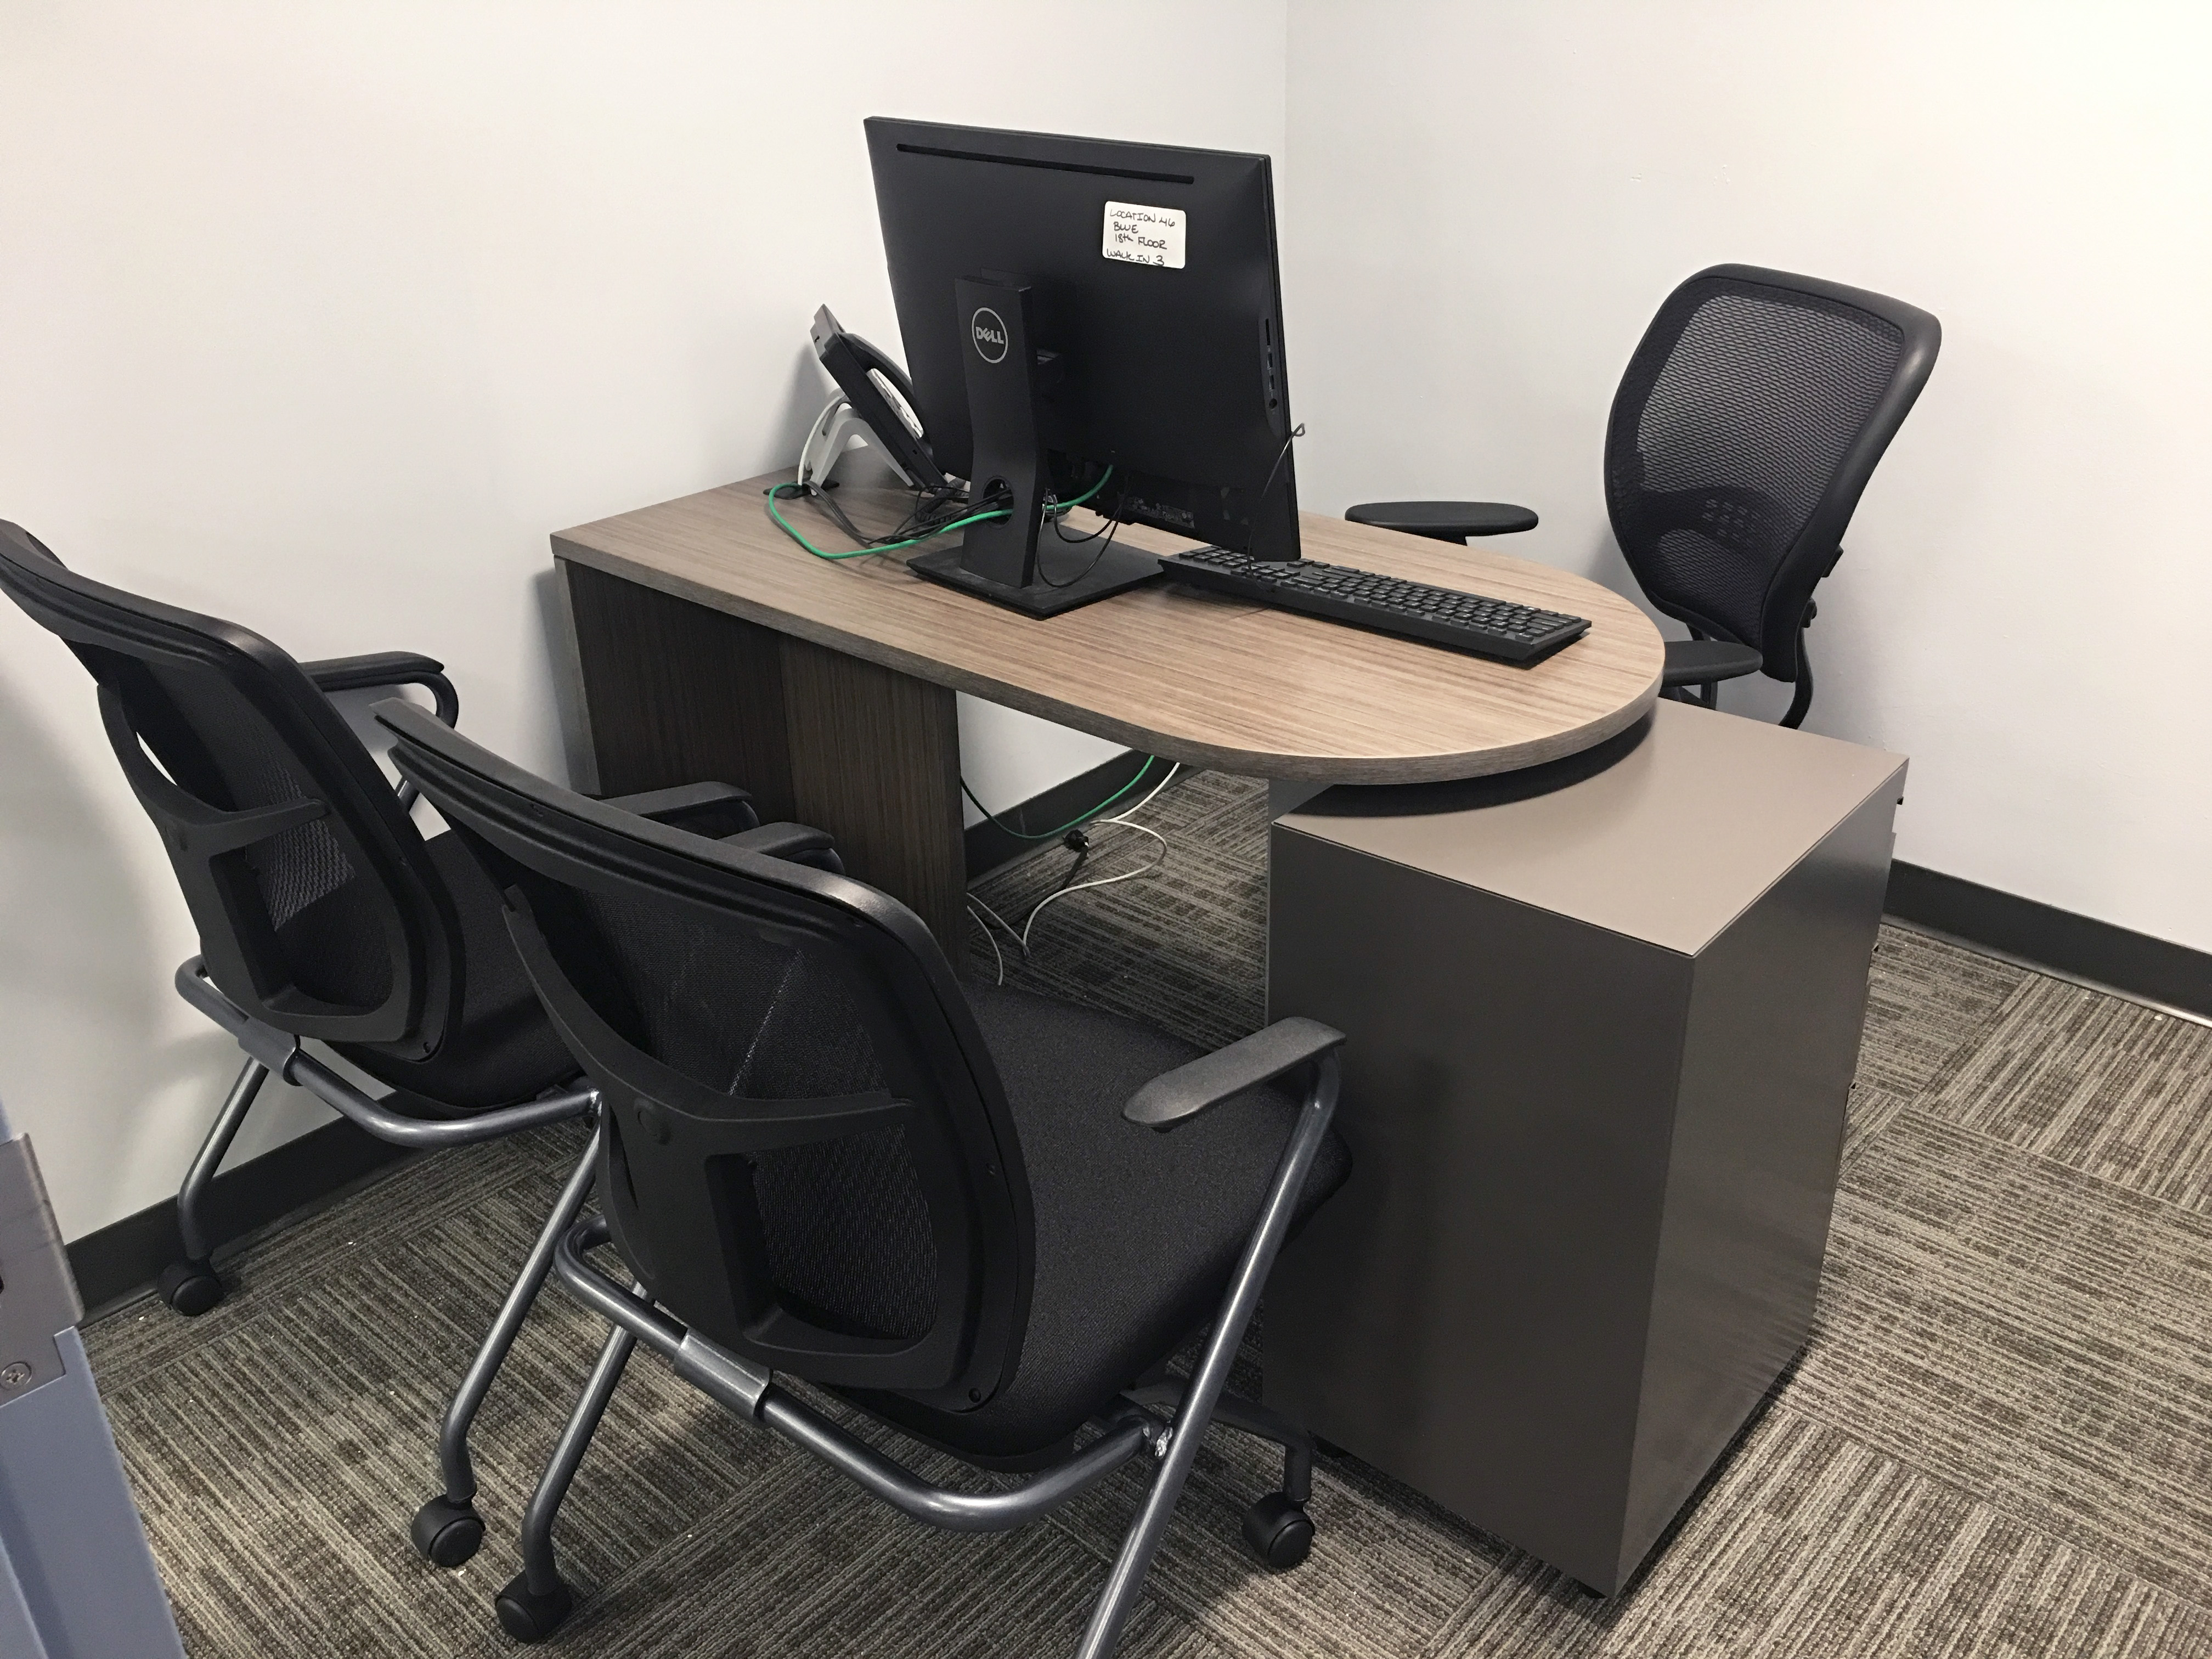 Manhattan office furniture nyc employee benefits 18 NY 092018 5a